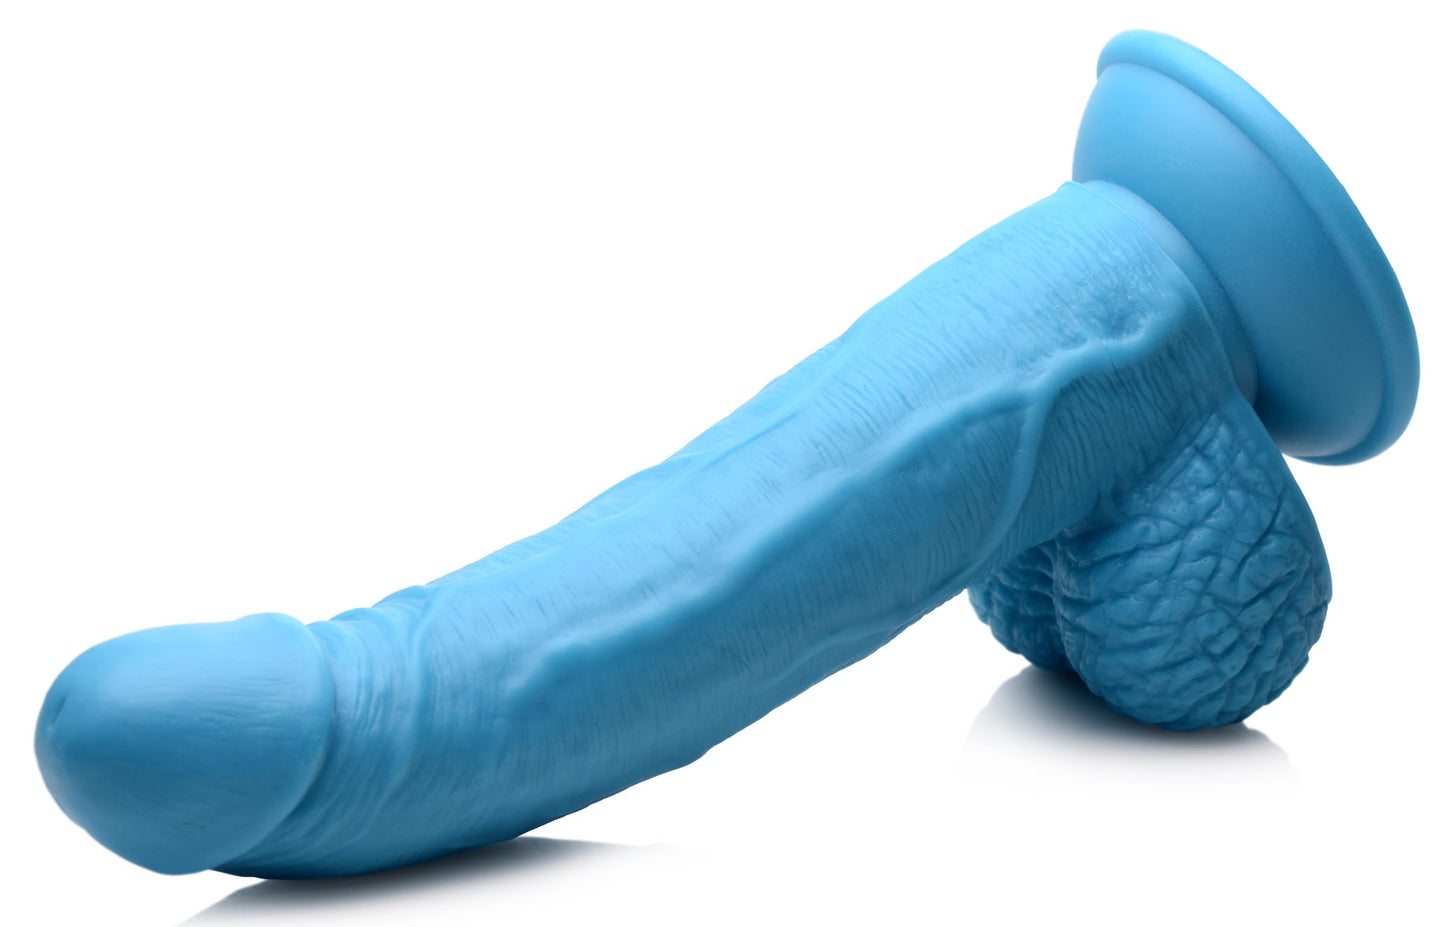 7.5 Inch Dildo With Balls - Blue